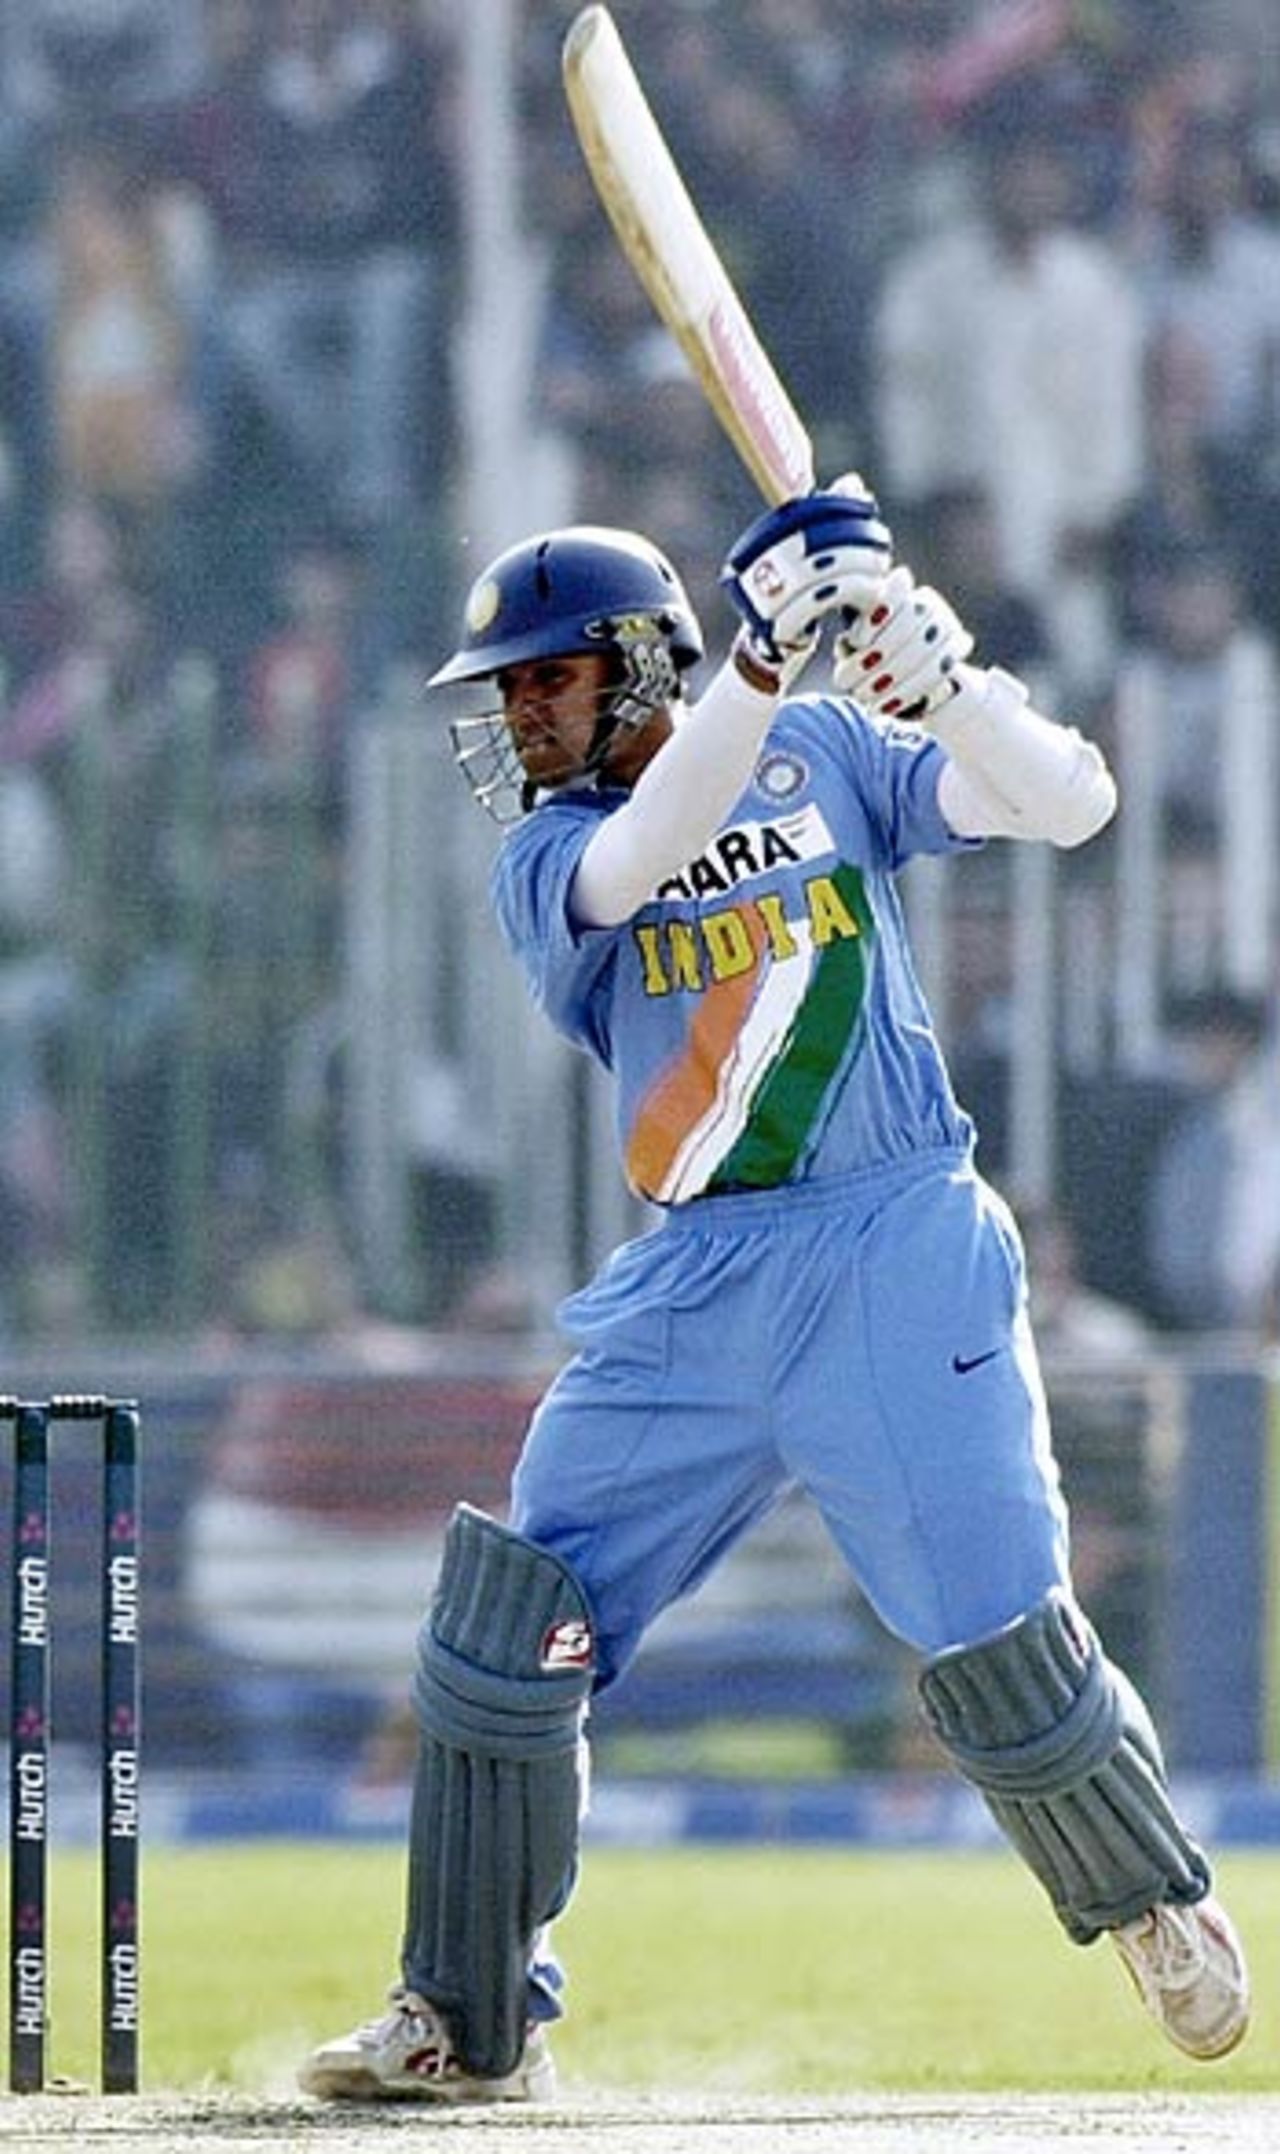 Rahul Dravid cuts the spinners en route to his fifty, Pakistan v India, 2nd ODI, Rawalpindi, February 11 2006